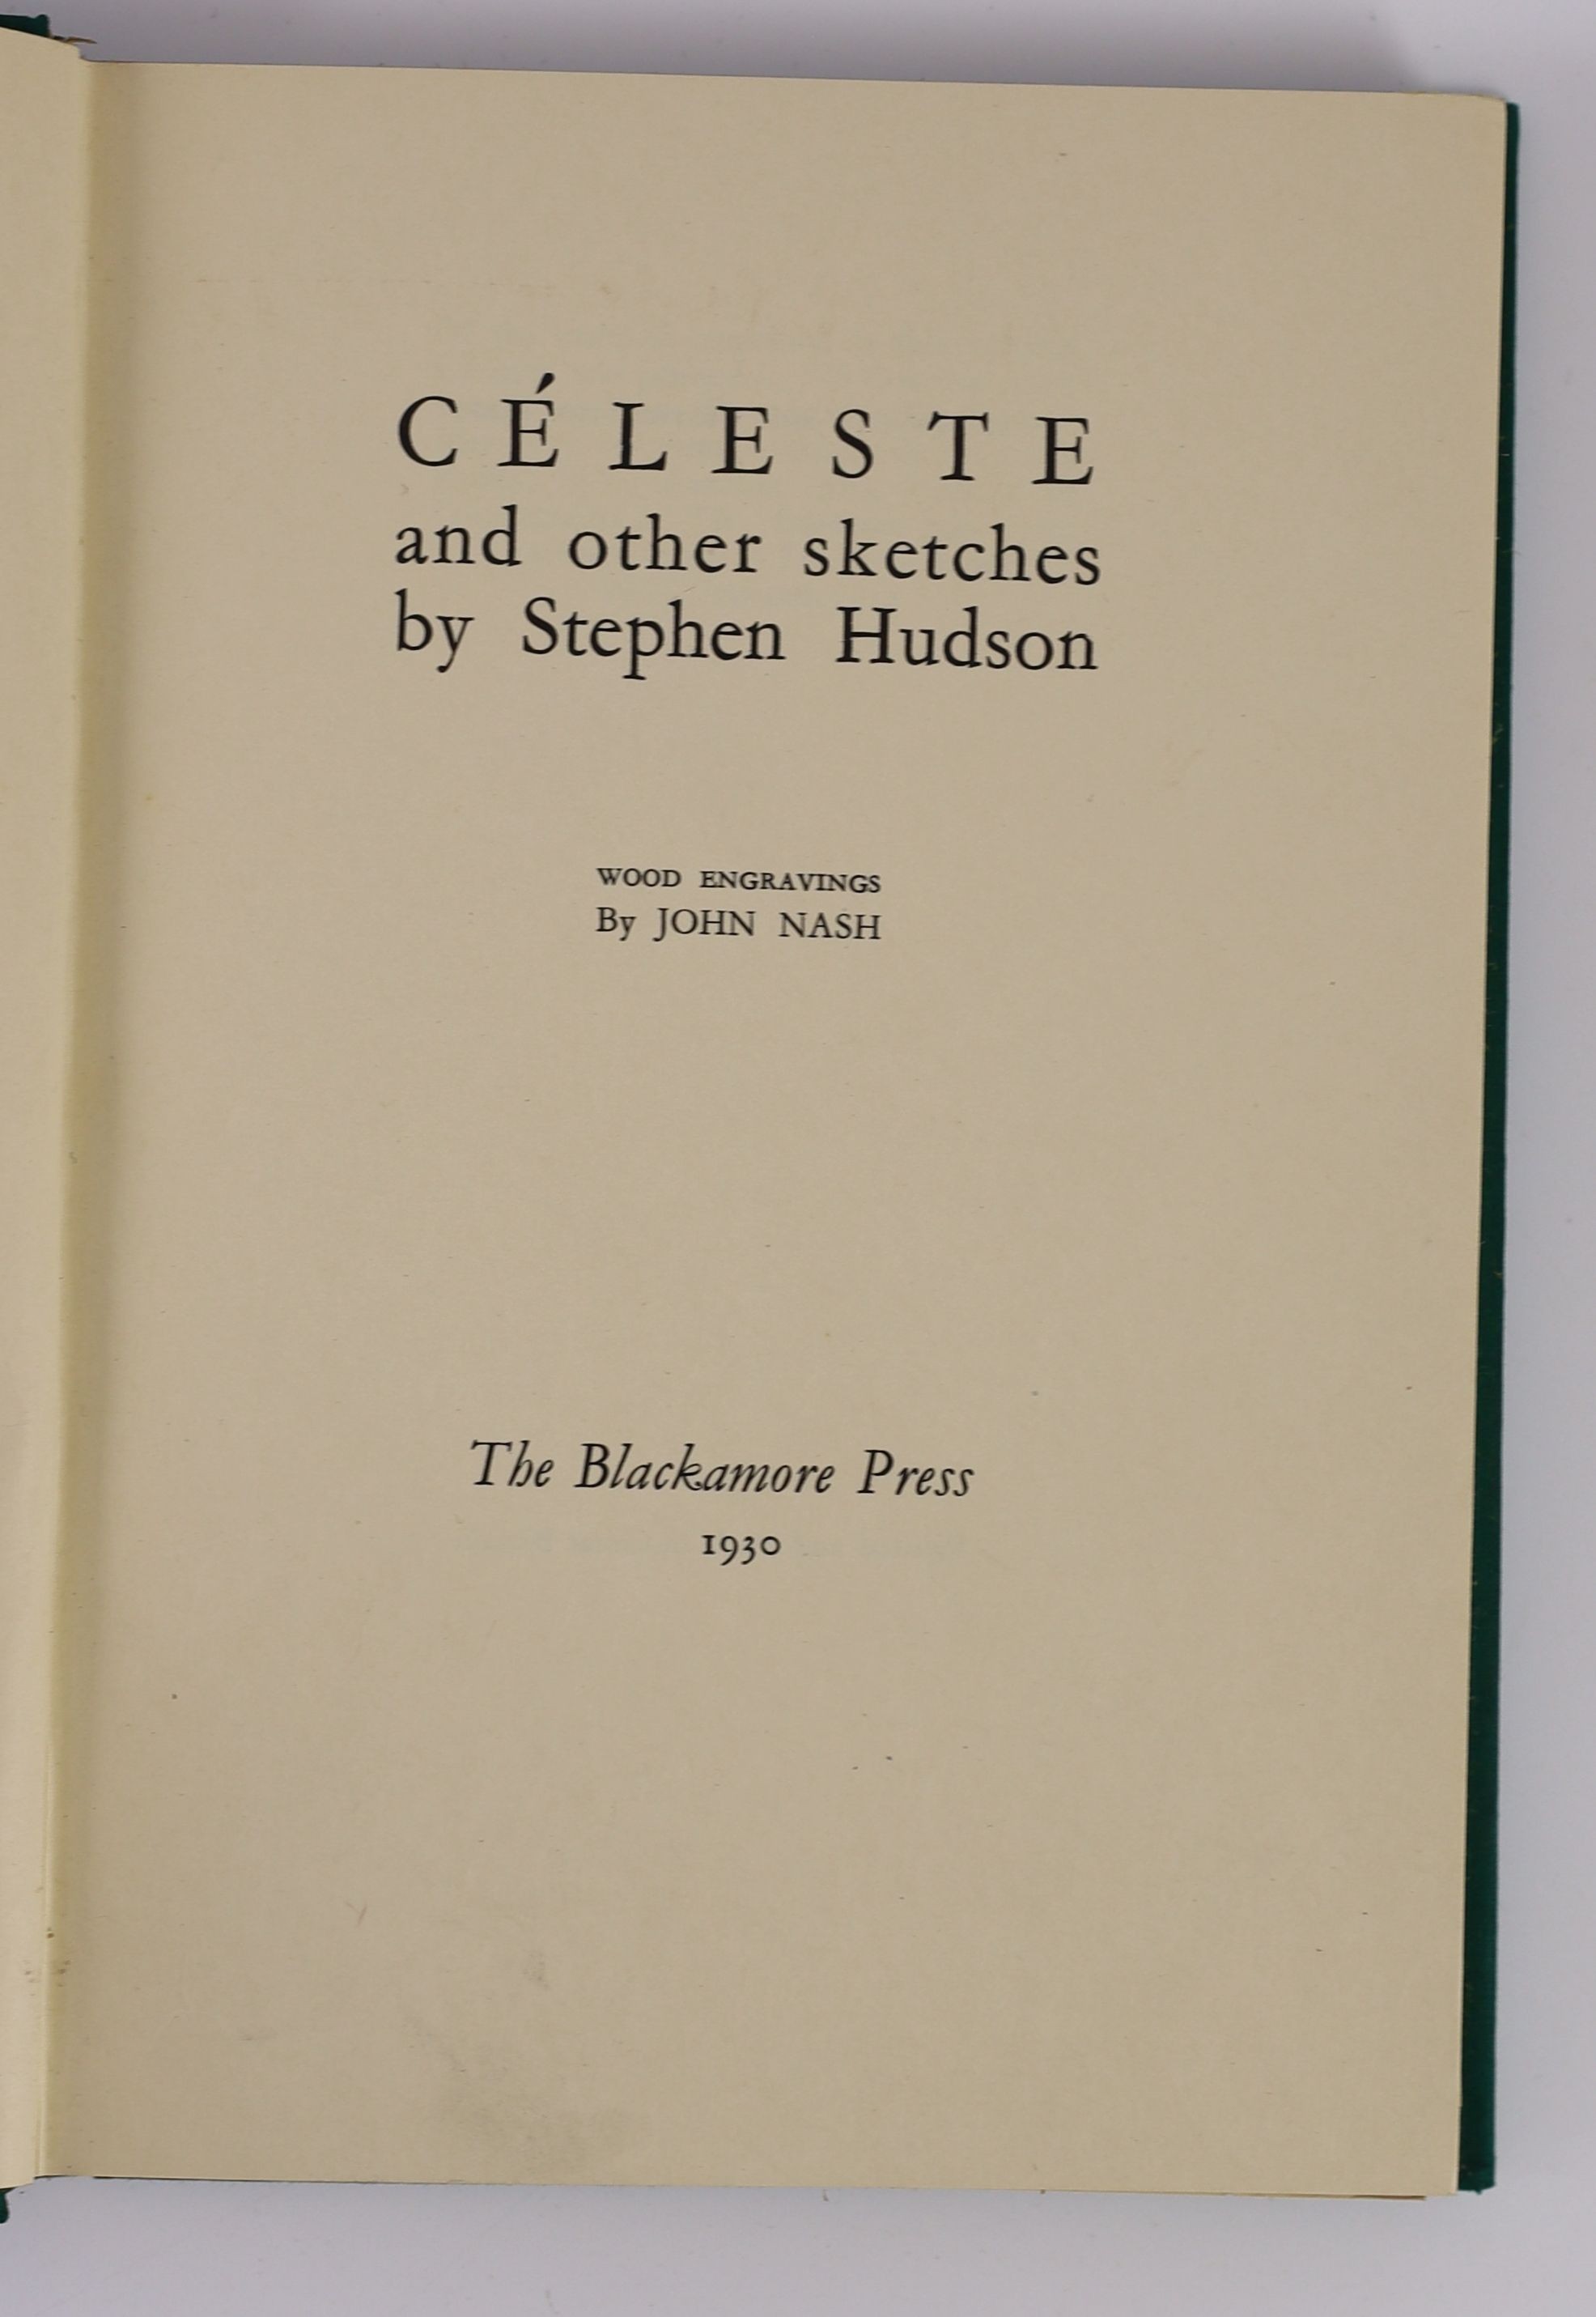 Hudson, Stephen - Céleste and Other Sketches. 1st and Limited edition, one of 50, on Japanese vellum. Signed by both author and illustrator, John Nash. 6 illustrated plates bound-in, plus a duplicate set loose in guard a